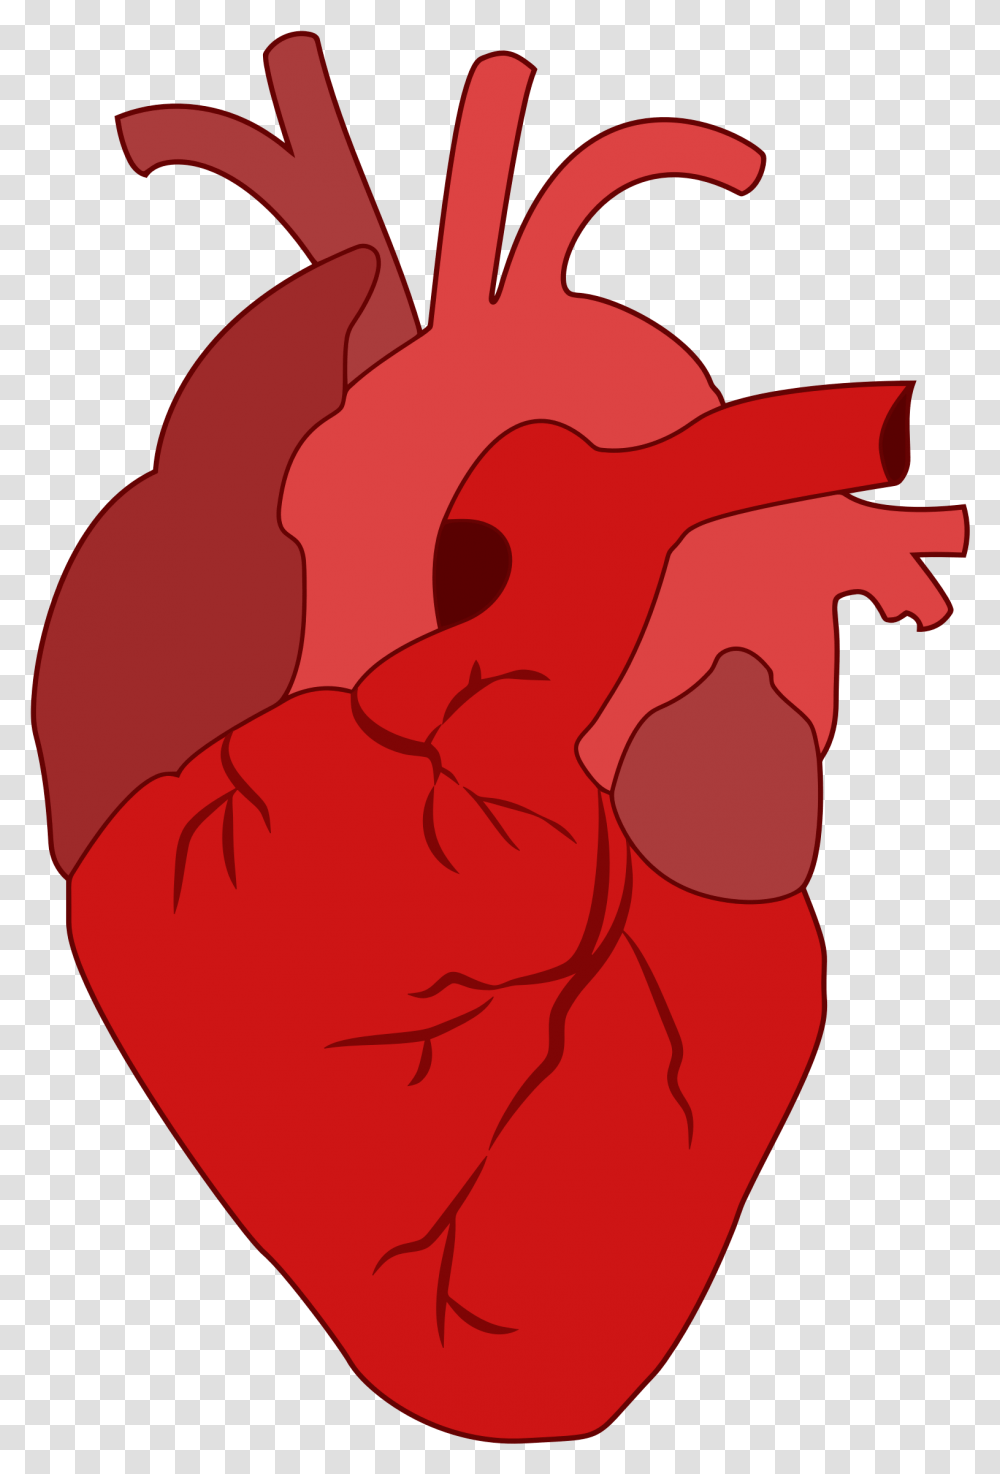 Download Blood And Bleeding In The Body Parts Clipart Heart, Plant Transparent Png